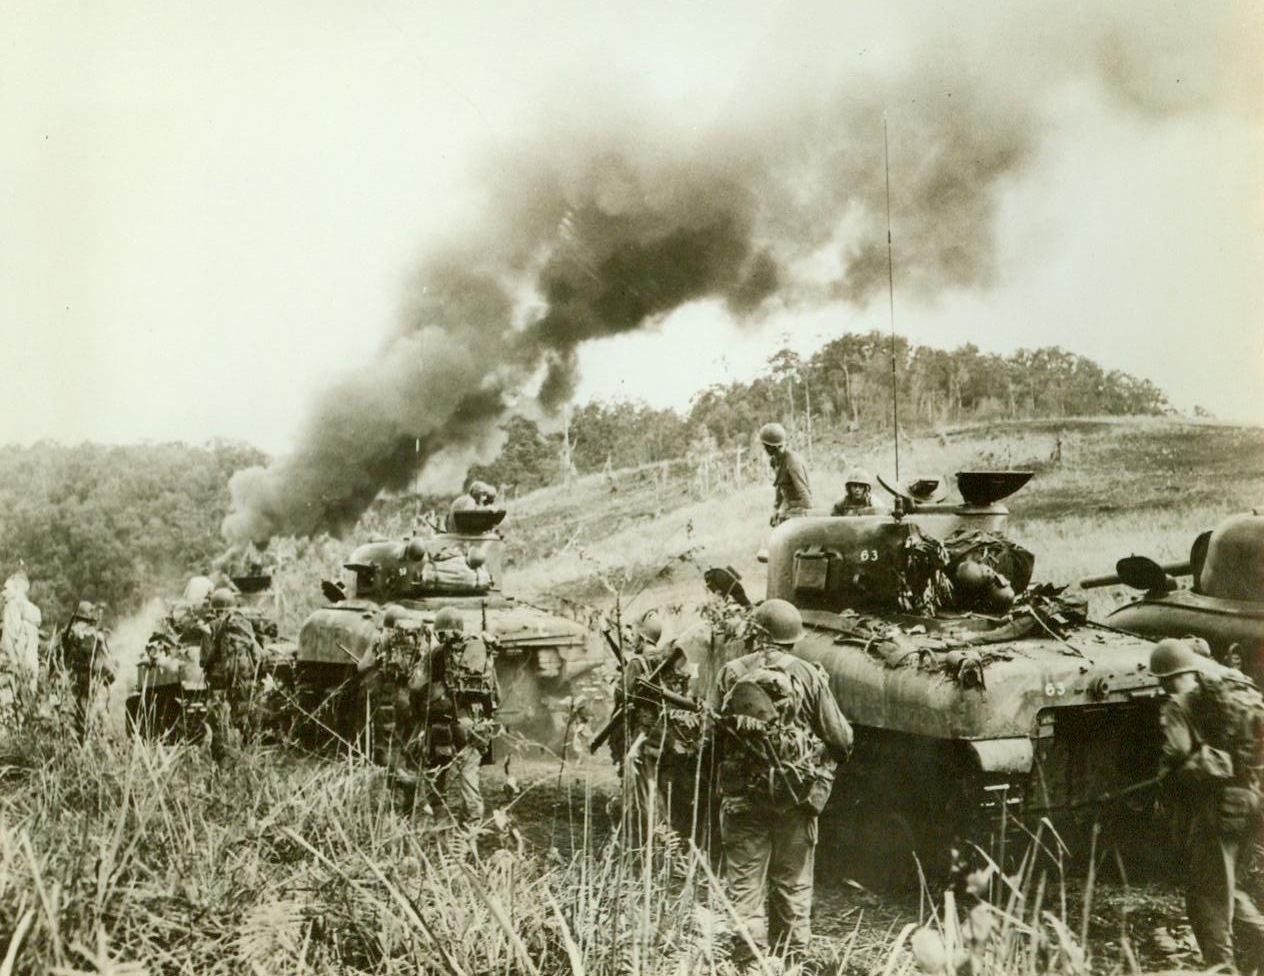 “Battle-Wagons” Carry Invading Allied Forces, 5/8/1944. Hollandia— Organizing these “General Sherman” tanks to set out in pursuit of Fleeing Japs, these Allied soldiers head in the direction of the heavy wooded areas around Hollandia. The invading forces struck a surprise blow at the Japs at Hollandia, and came out of the battle with one more important enemy airfield added to their roster of conquered enemy territory. These routine “mop-up” patrols are designed to crush and remaining Jap resistance. 5/8/44 (ACME);